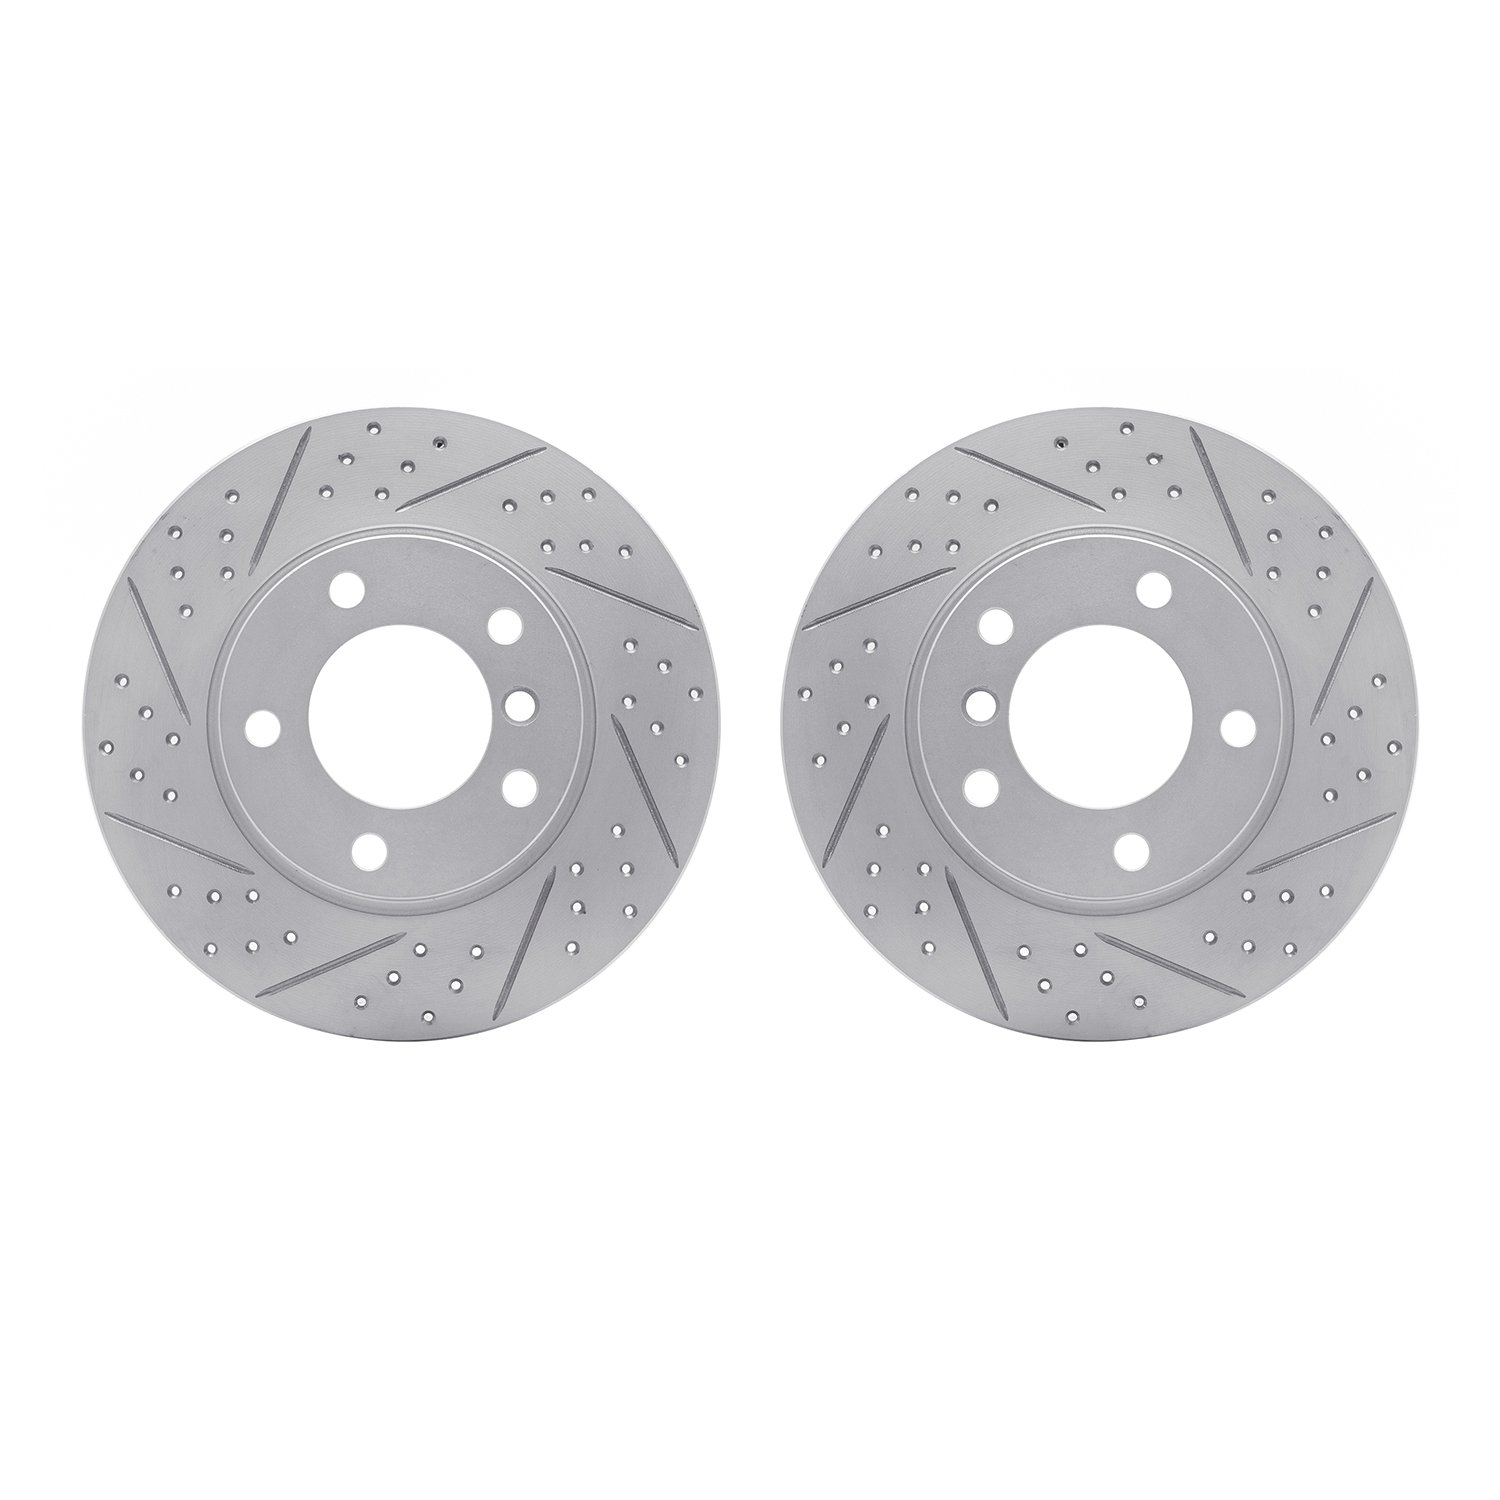 2002-31009 Geoperformance Drilled/Slotted Brake Rotors, 1995-1998 BMW, Position: Front